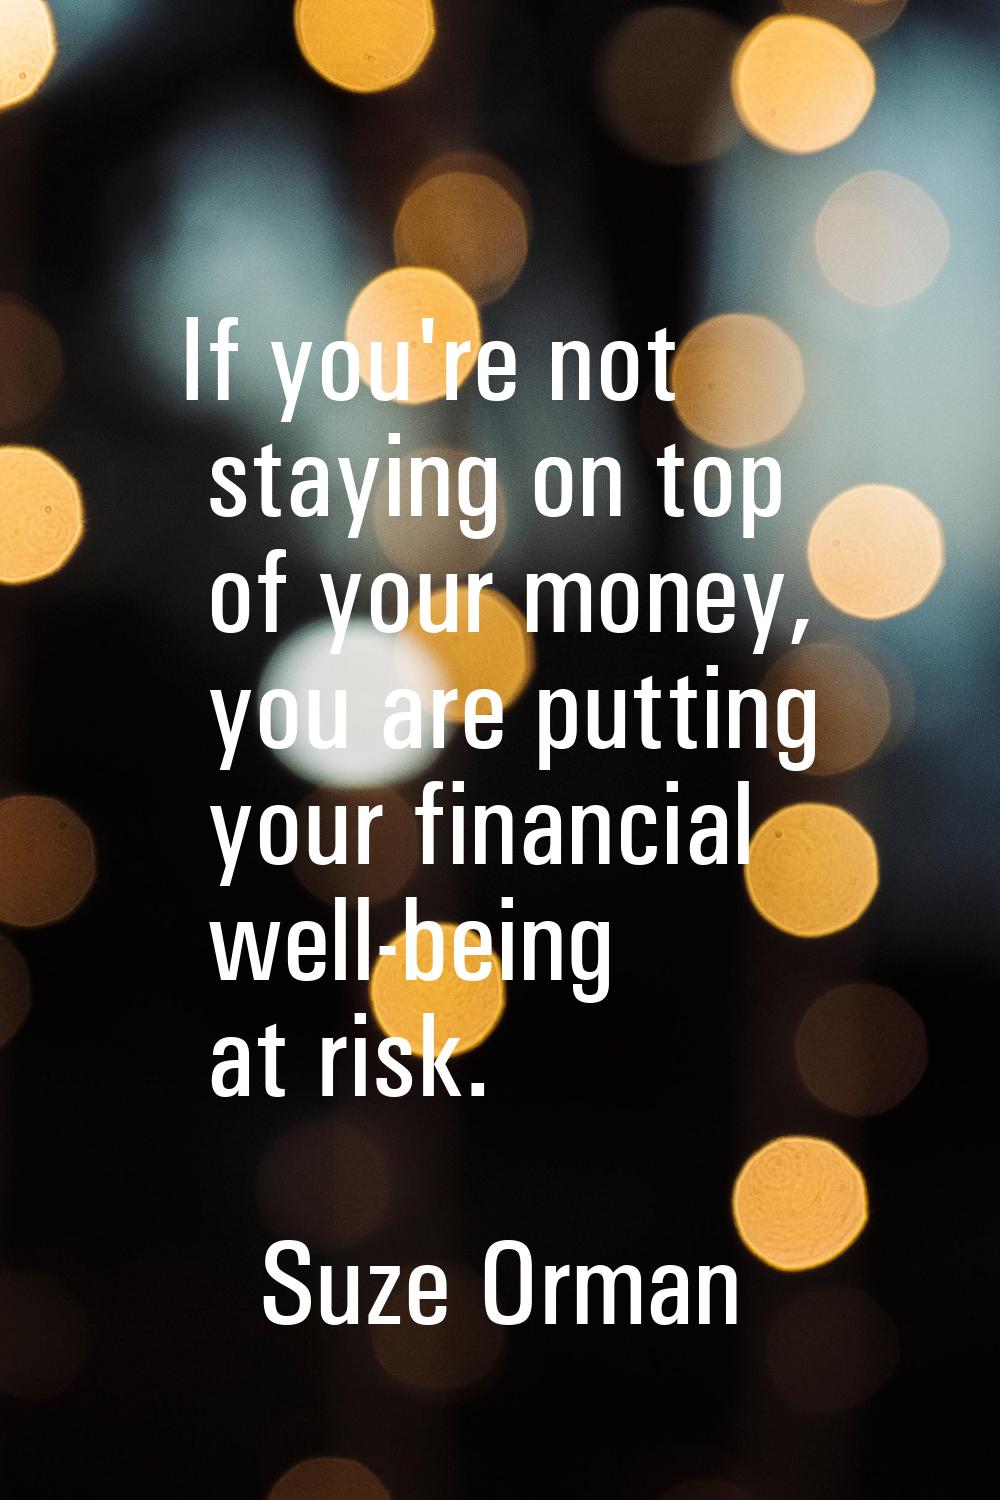 If you're not staying on top of your money, you are putting your financial well-being at risk.